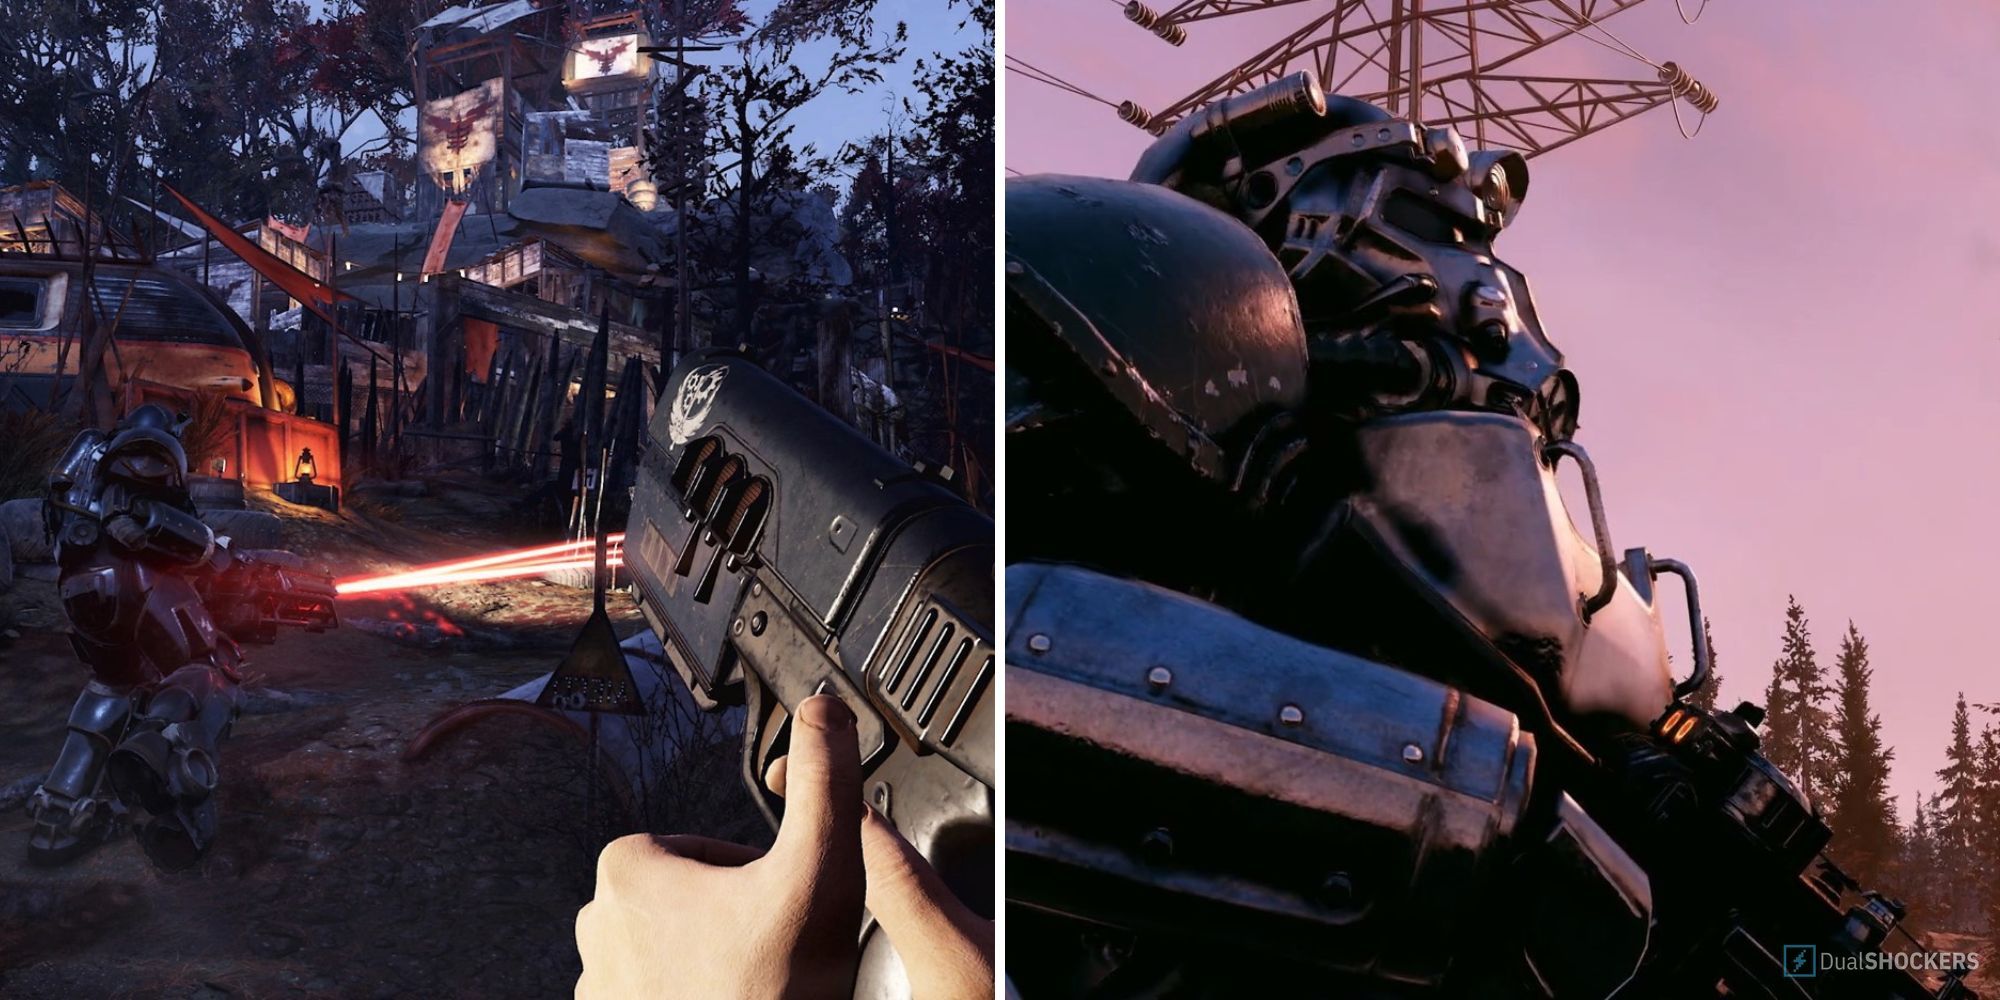 Fallout 76 How To Complete Daily Operation Article, BOS pistol, Raider Camp, Power Armor and Gauss Rifle